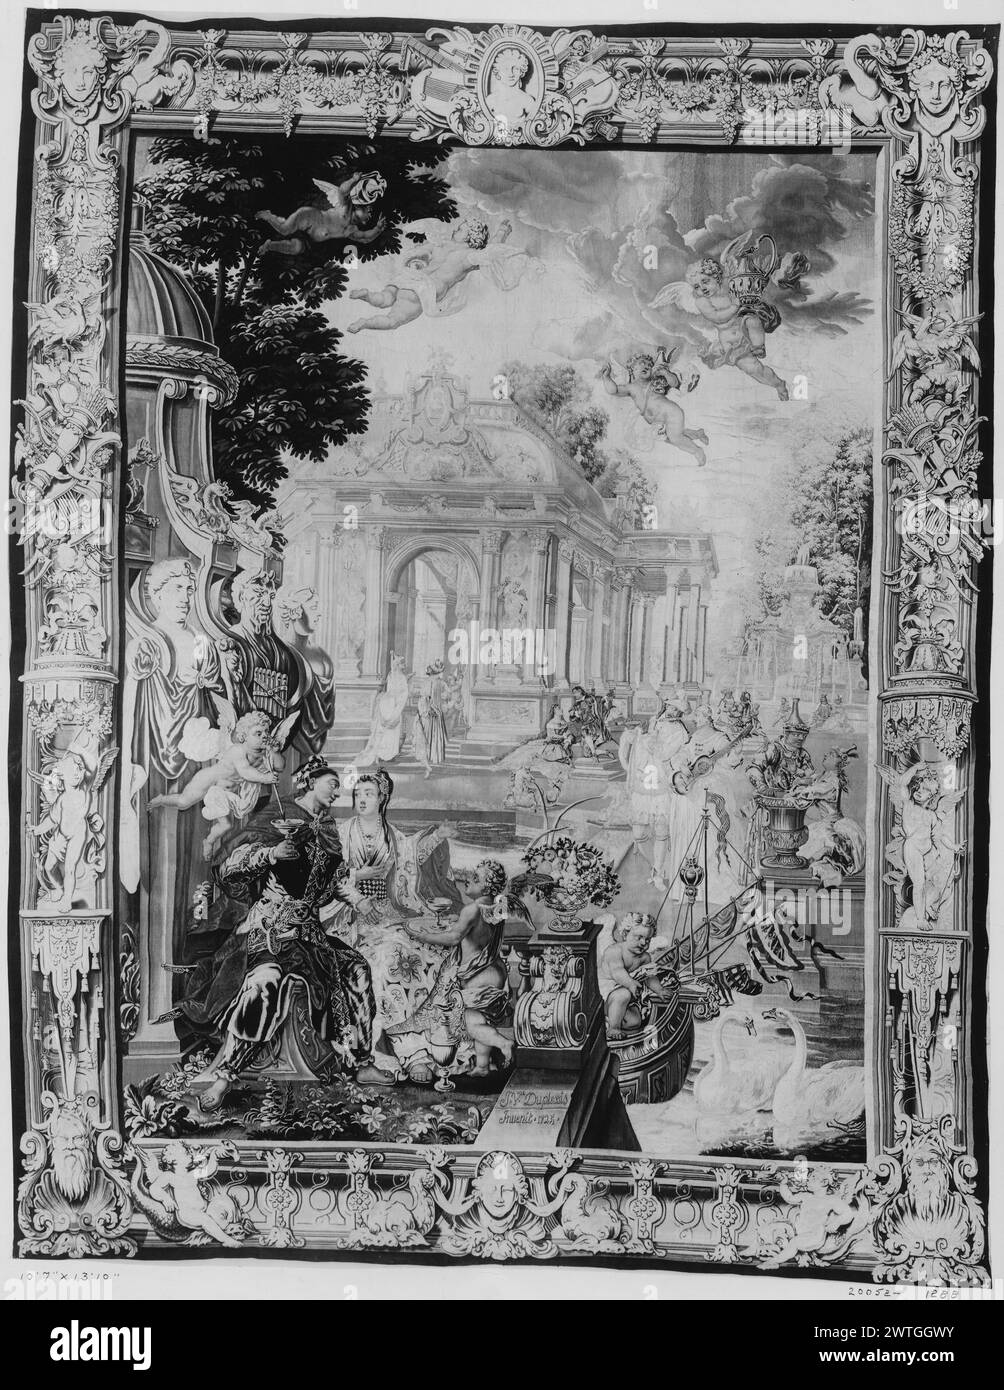 Temple of Venus. Duplessis, Jacques (French, act.1721) (author of design) [draughtsman] Mérou, Noël Antoine de (French, act.1722-1734) (workshop) [weaver] dated 1725 Tapestry Dimensions: H 13'10' x W 10'7' Tapestry Materials/Techniques: unknown Culture: French Weaving Center: Beauvais Ownership History: A. Polovtsoff coll.; sold in Paris 12/2p-4/1909. French & Co. purchased from Percival Farquar 10/8/1917; sold to Walter N. Feffords 5/31/1918; sold by children at Sothebys' 1991. United States, New York, New York, Sotheby's, June 1, 1991, lot 317. Inscriptions: Woven signature on ledge in lower Stock Photo